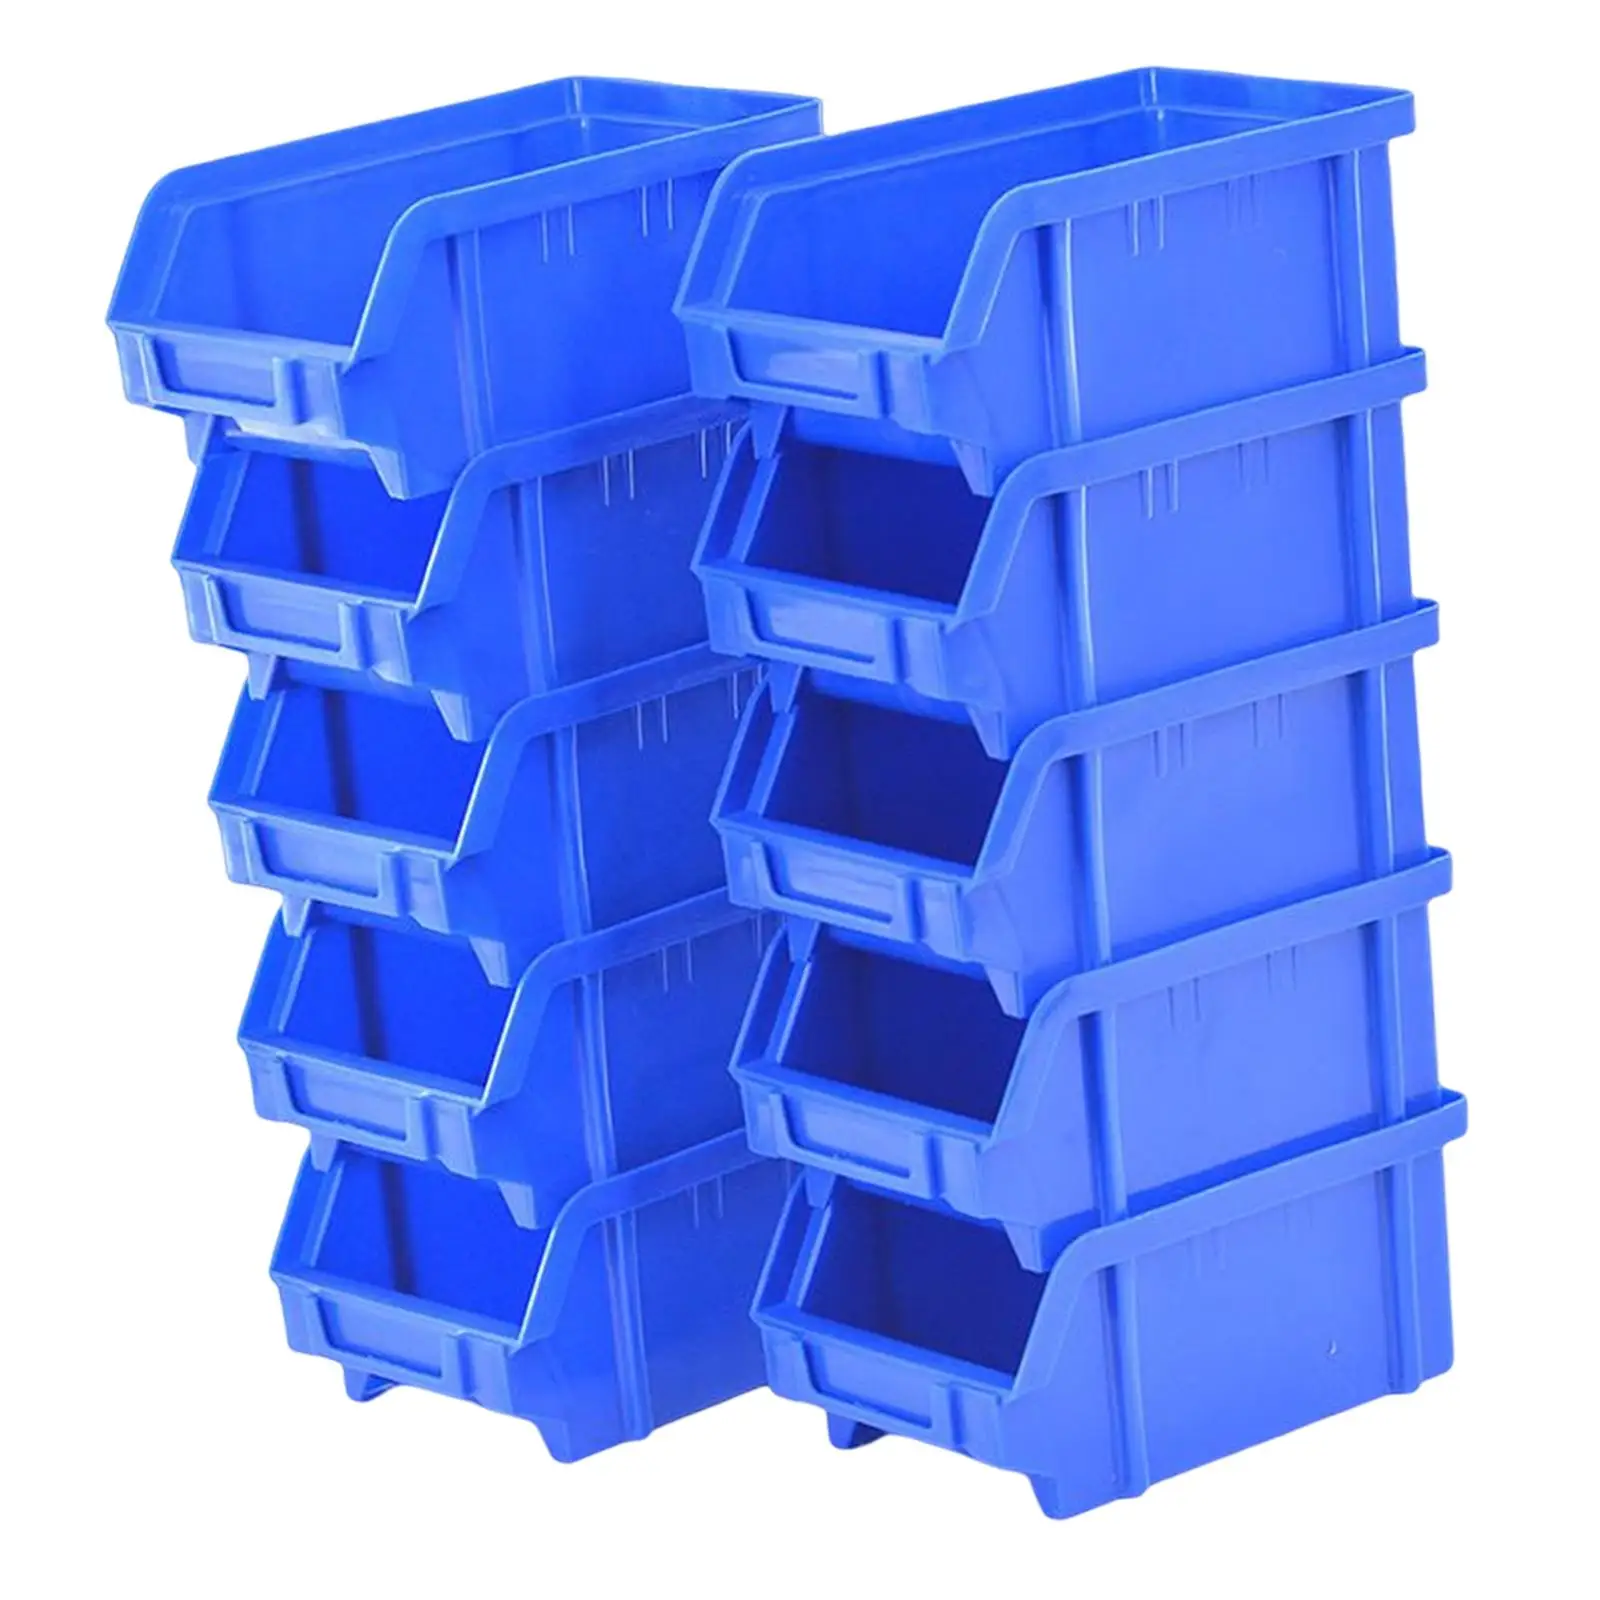 10Pcs Heavy Duty Storage Bins Containers Mounted Backboard Hardware Parts Tray Tool Parts Organizers for Warehouse Garage Shop